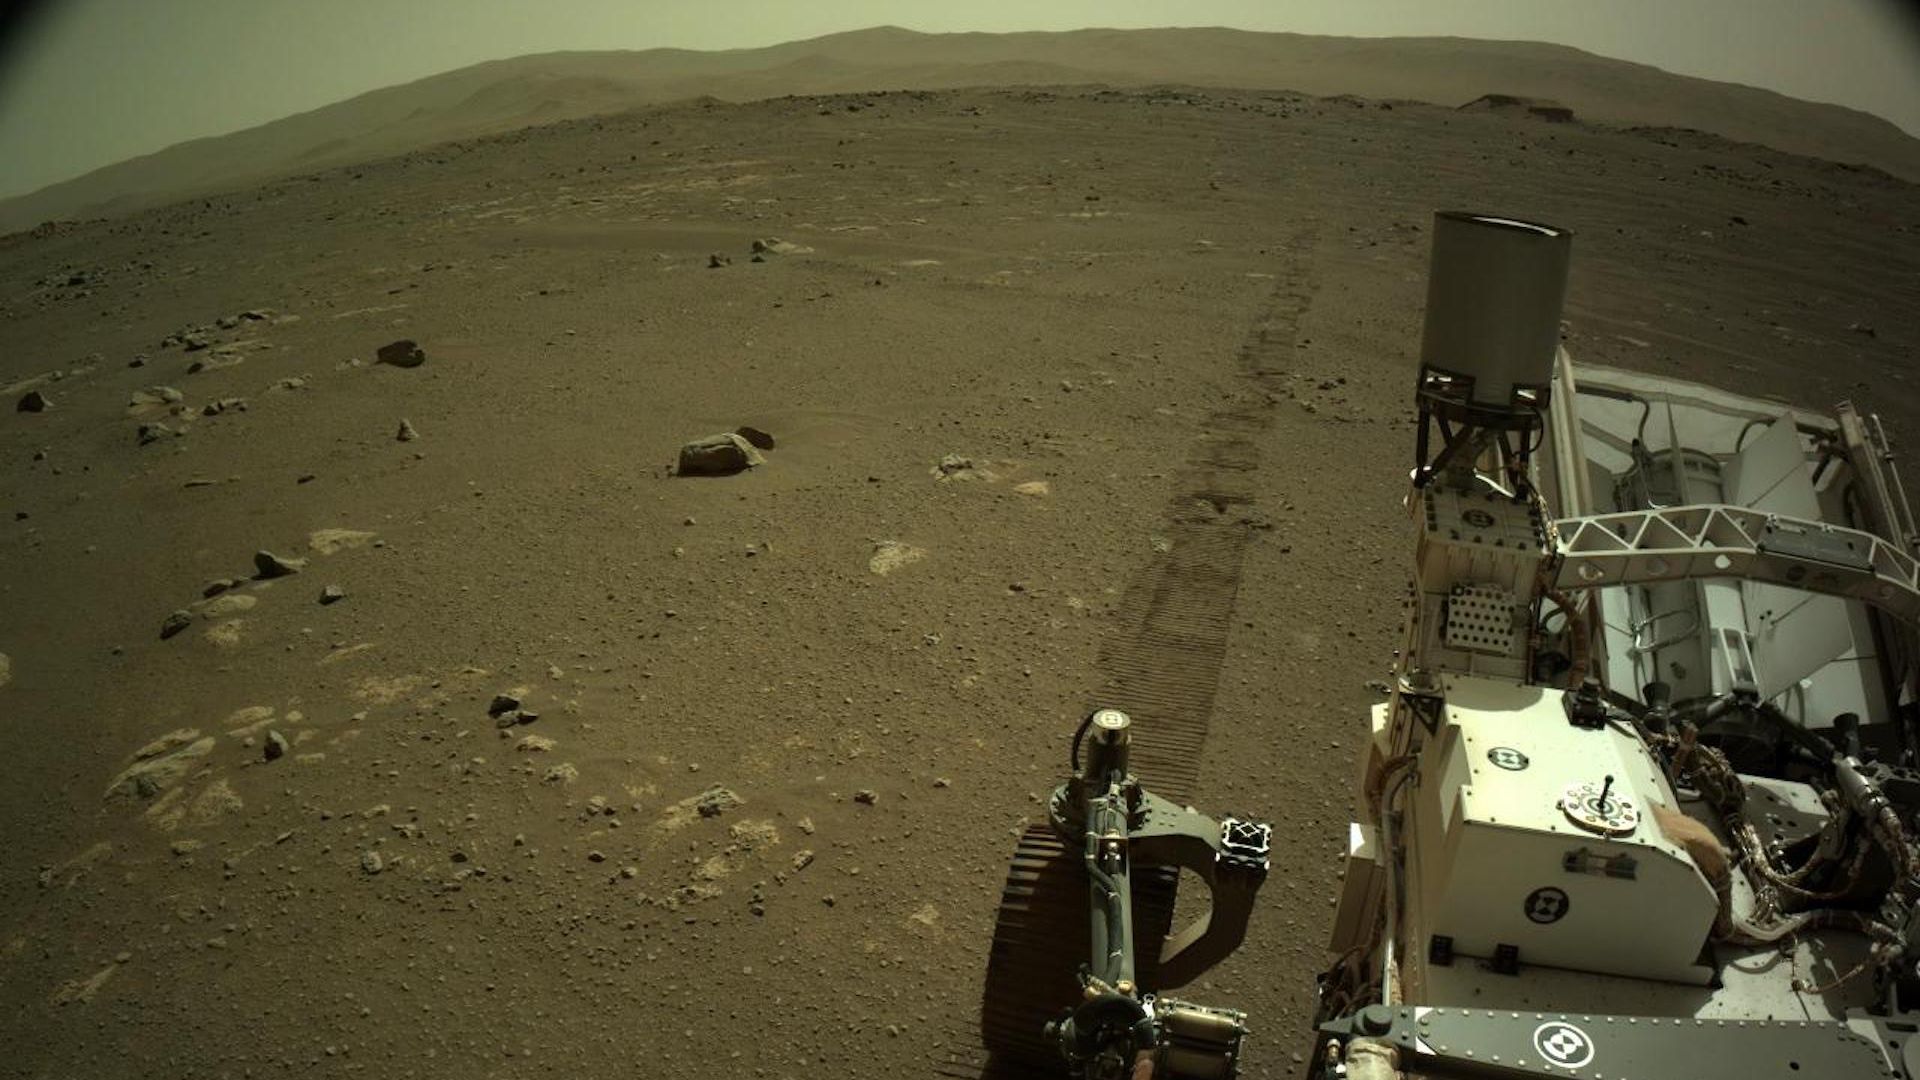 Tracks trailing out behind the Perseverance rover with rising mountains in the distance on Mars